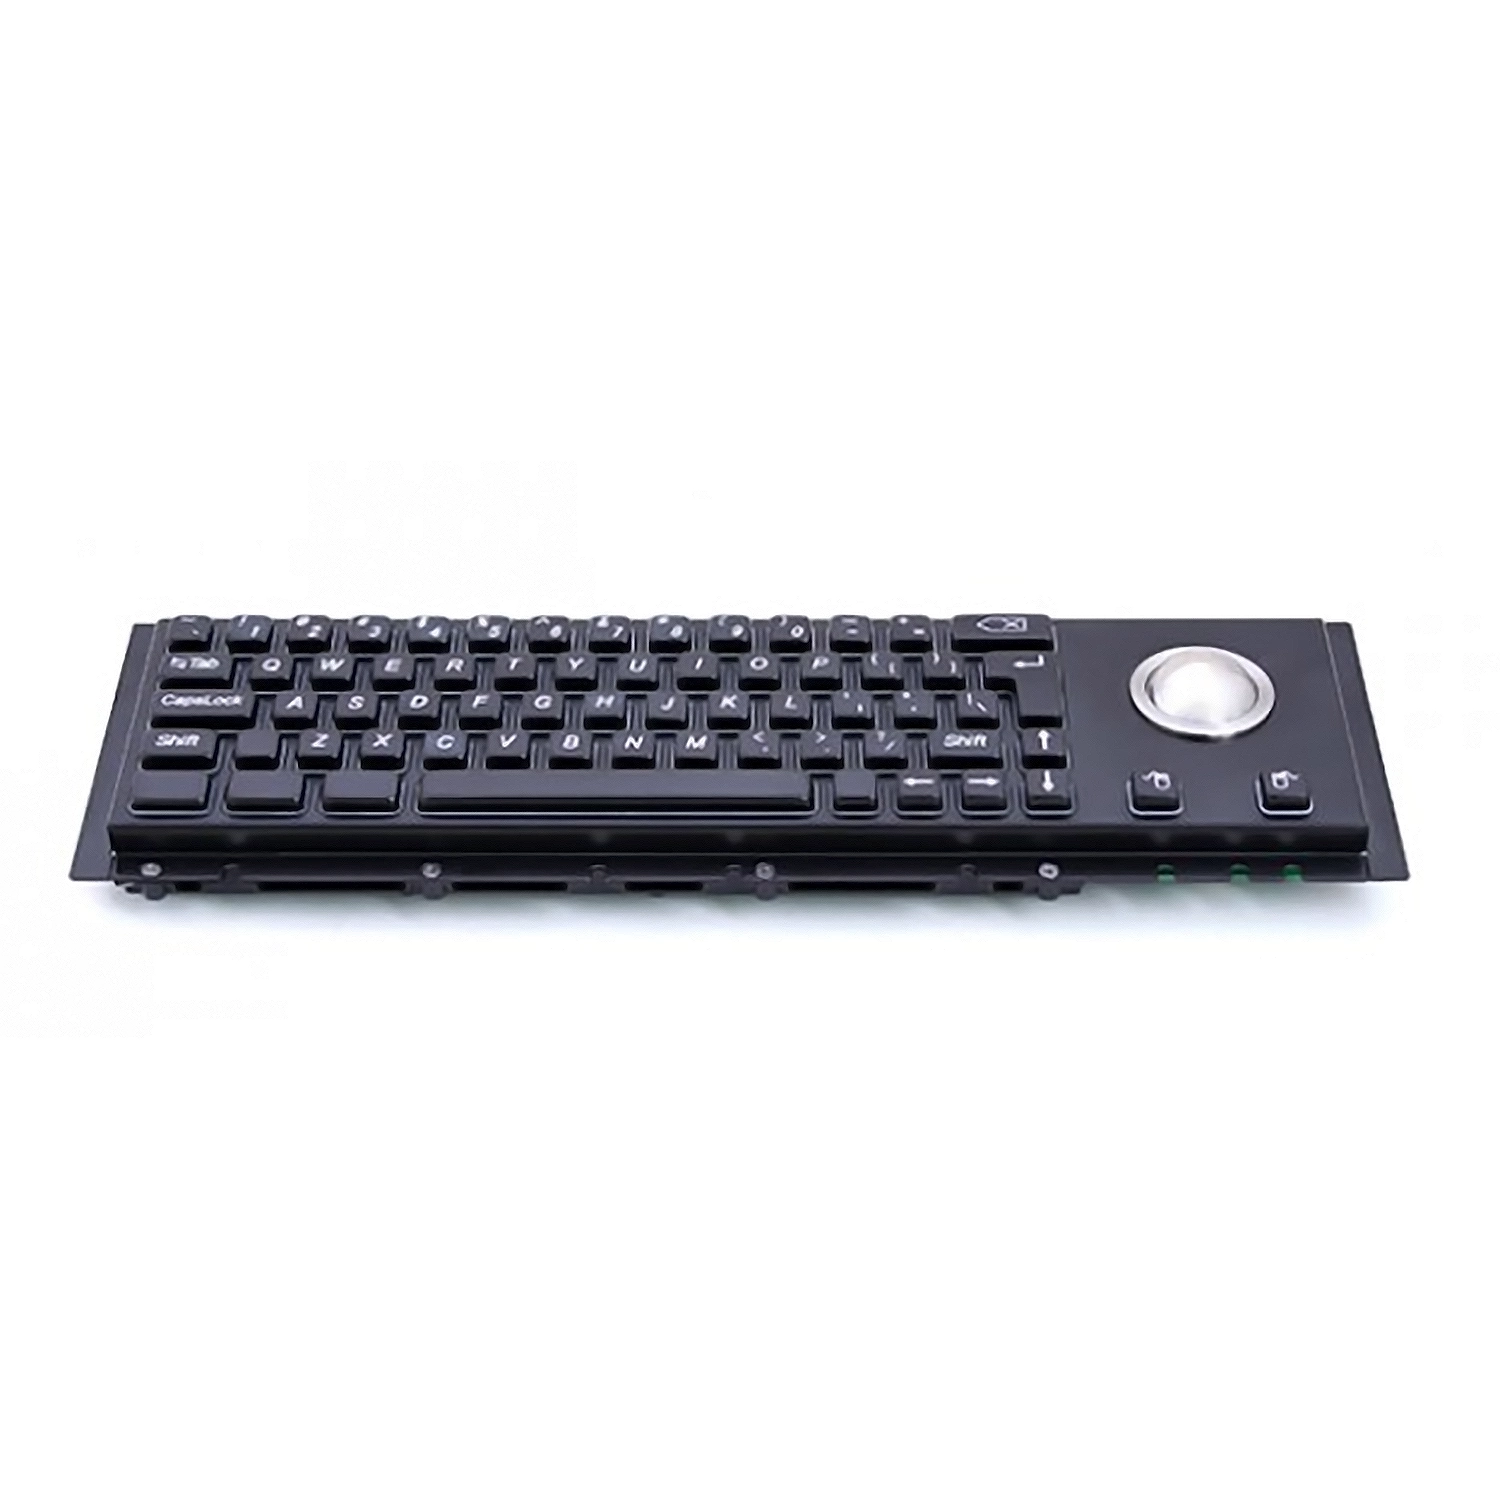 Rugged panel mount keyboard with trackball KB-000-NW0S0T12